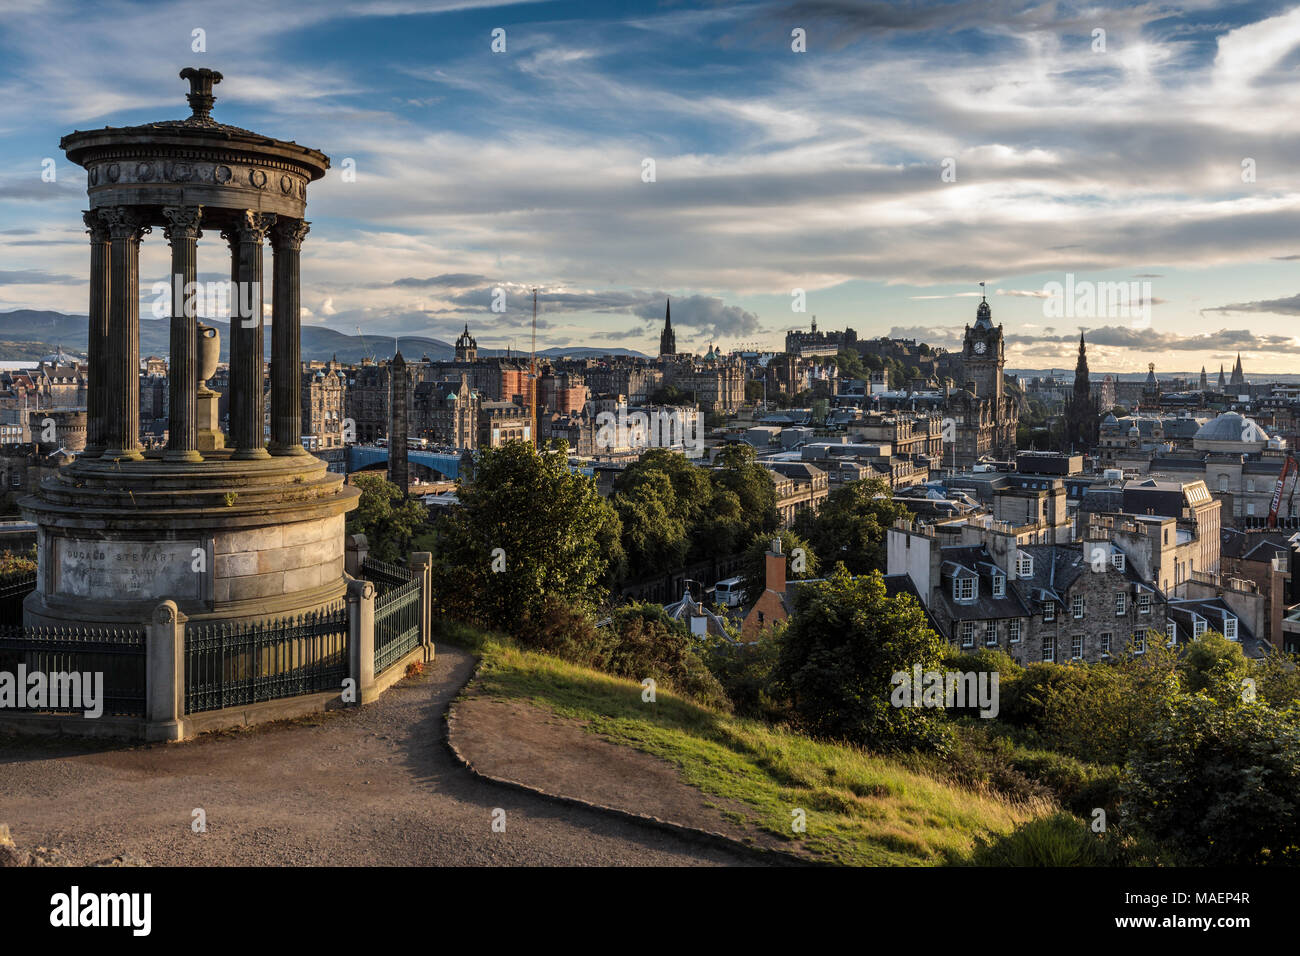 The Dugald Stewart Monument on Calton Hill with view of City skyline at sunset, Edinburgh, Scotland, UK. Stock Photo